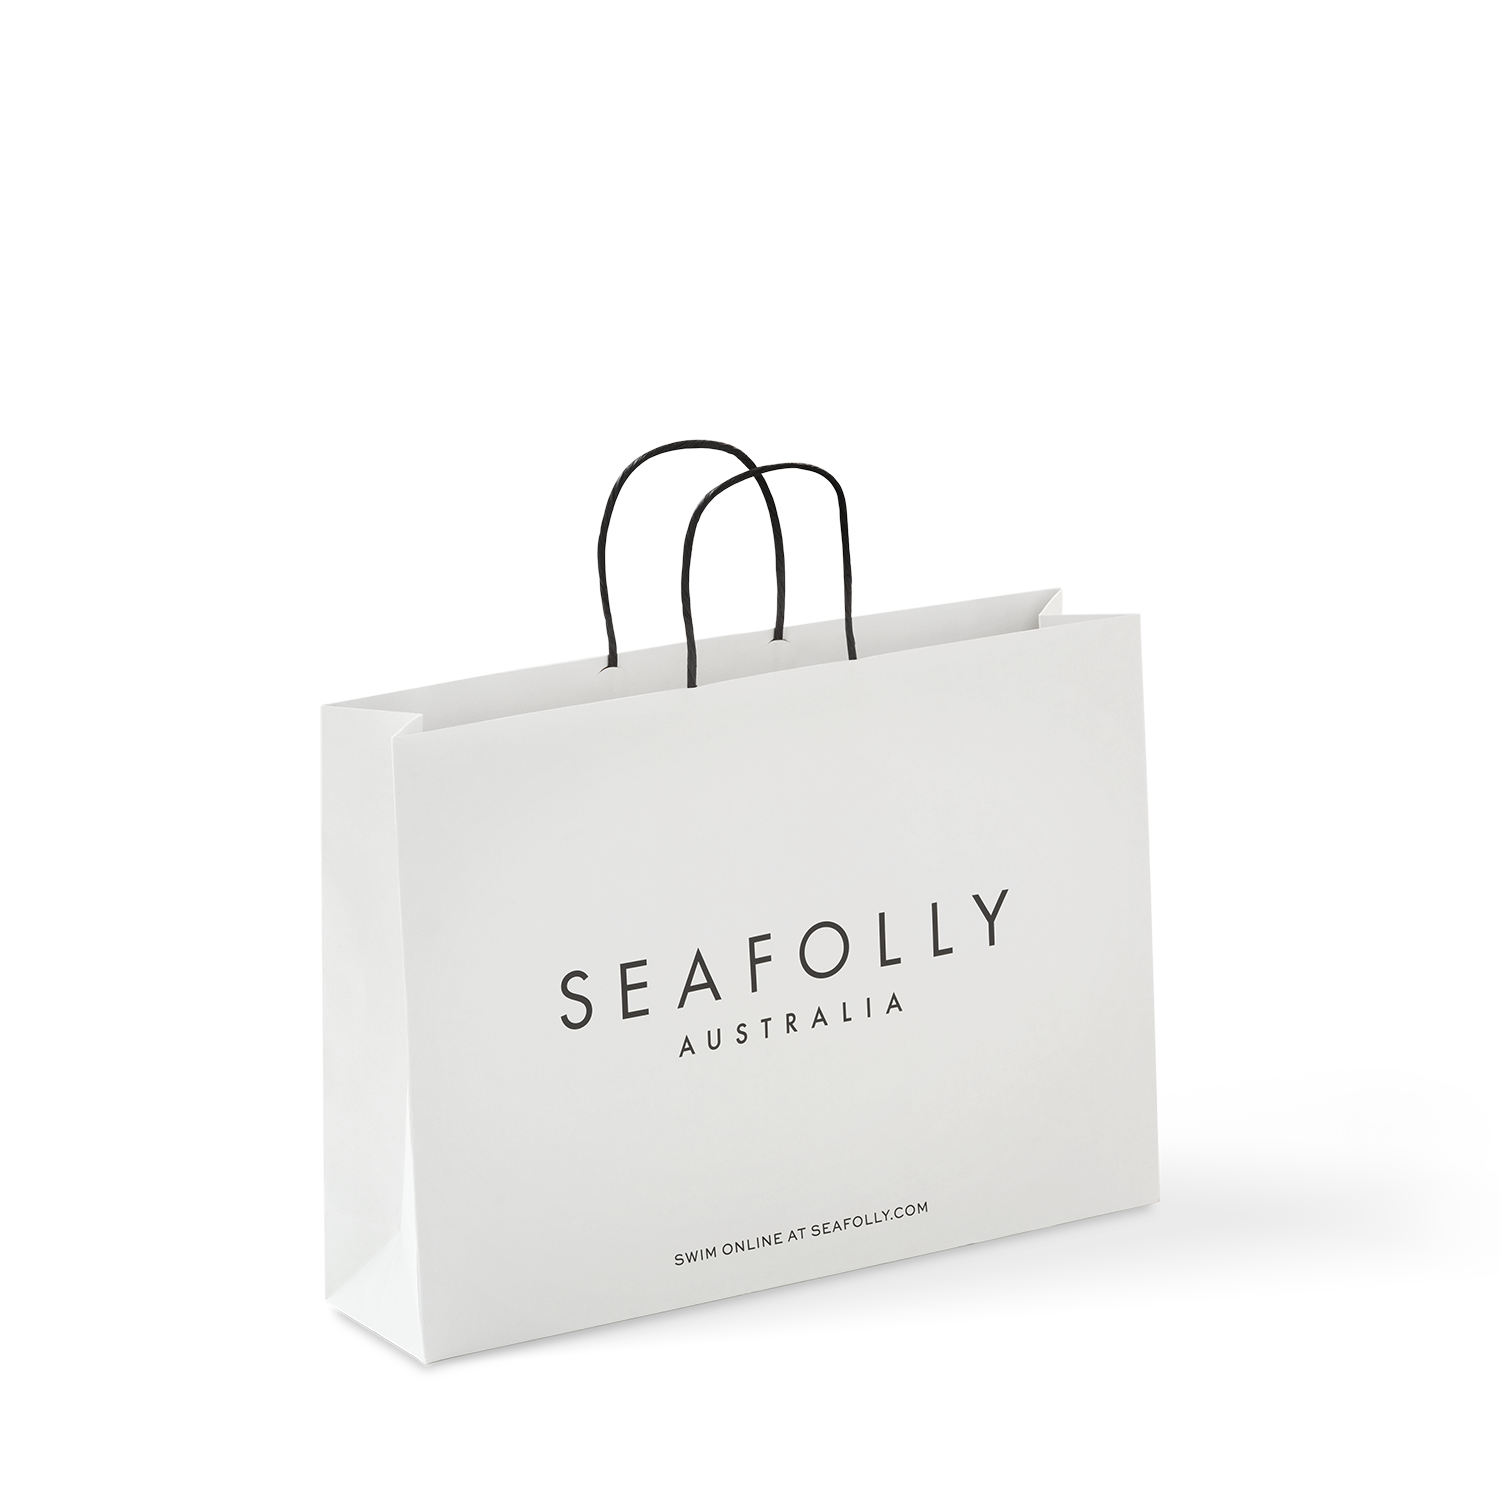 PaperPak Gallery Seafolly branded paper bag with paper twist handle